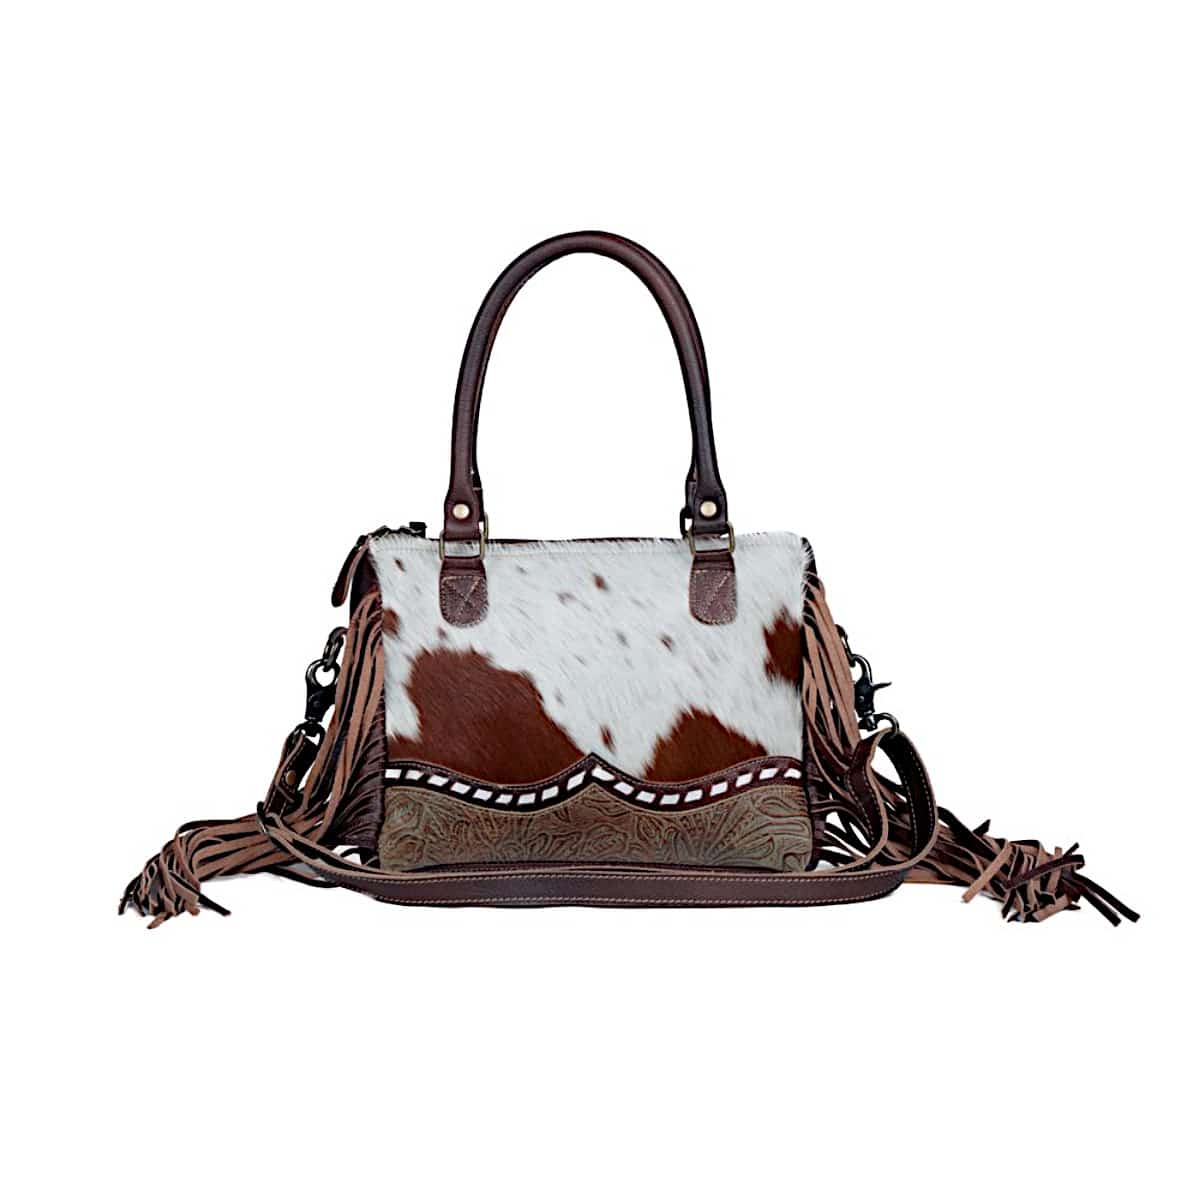 Buy Cowhide Fringe Purse Online In India -  India